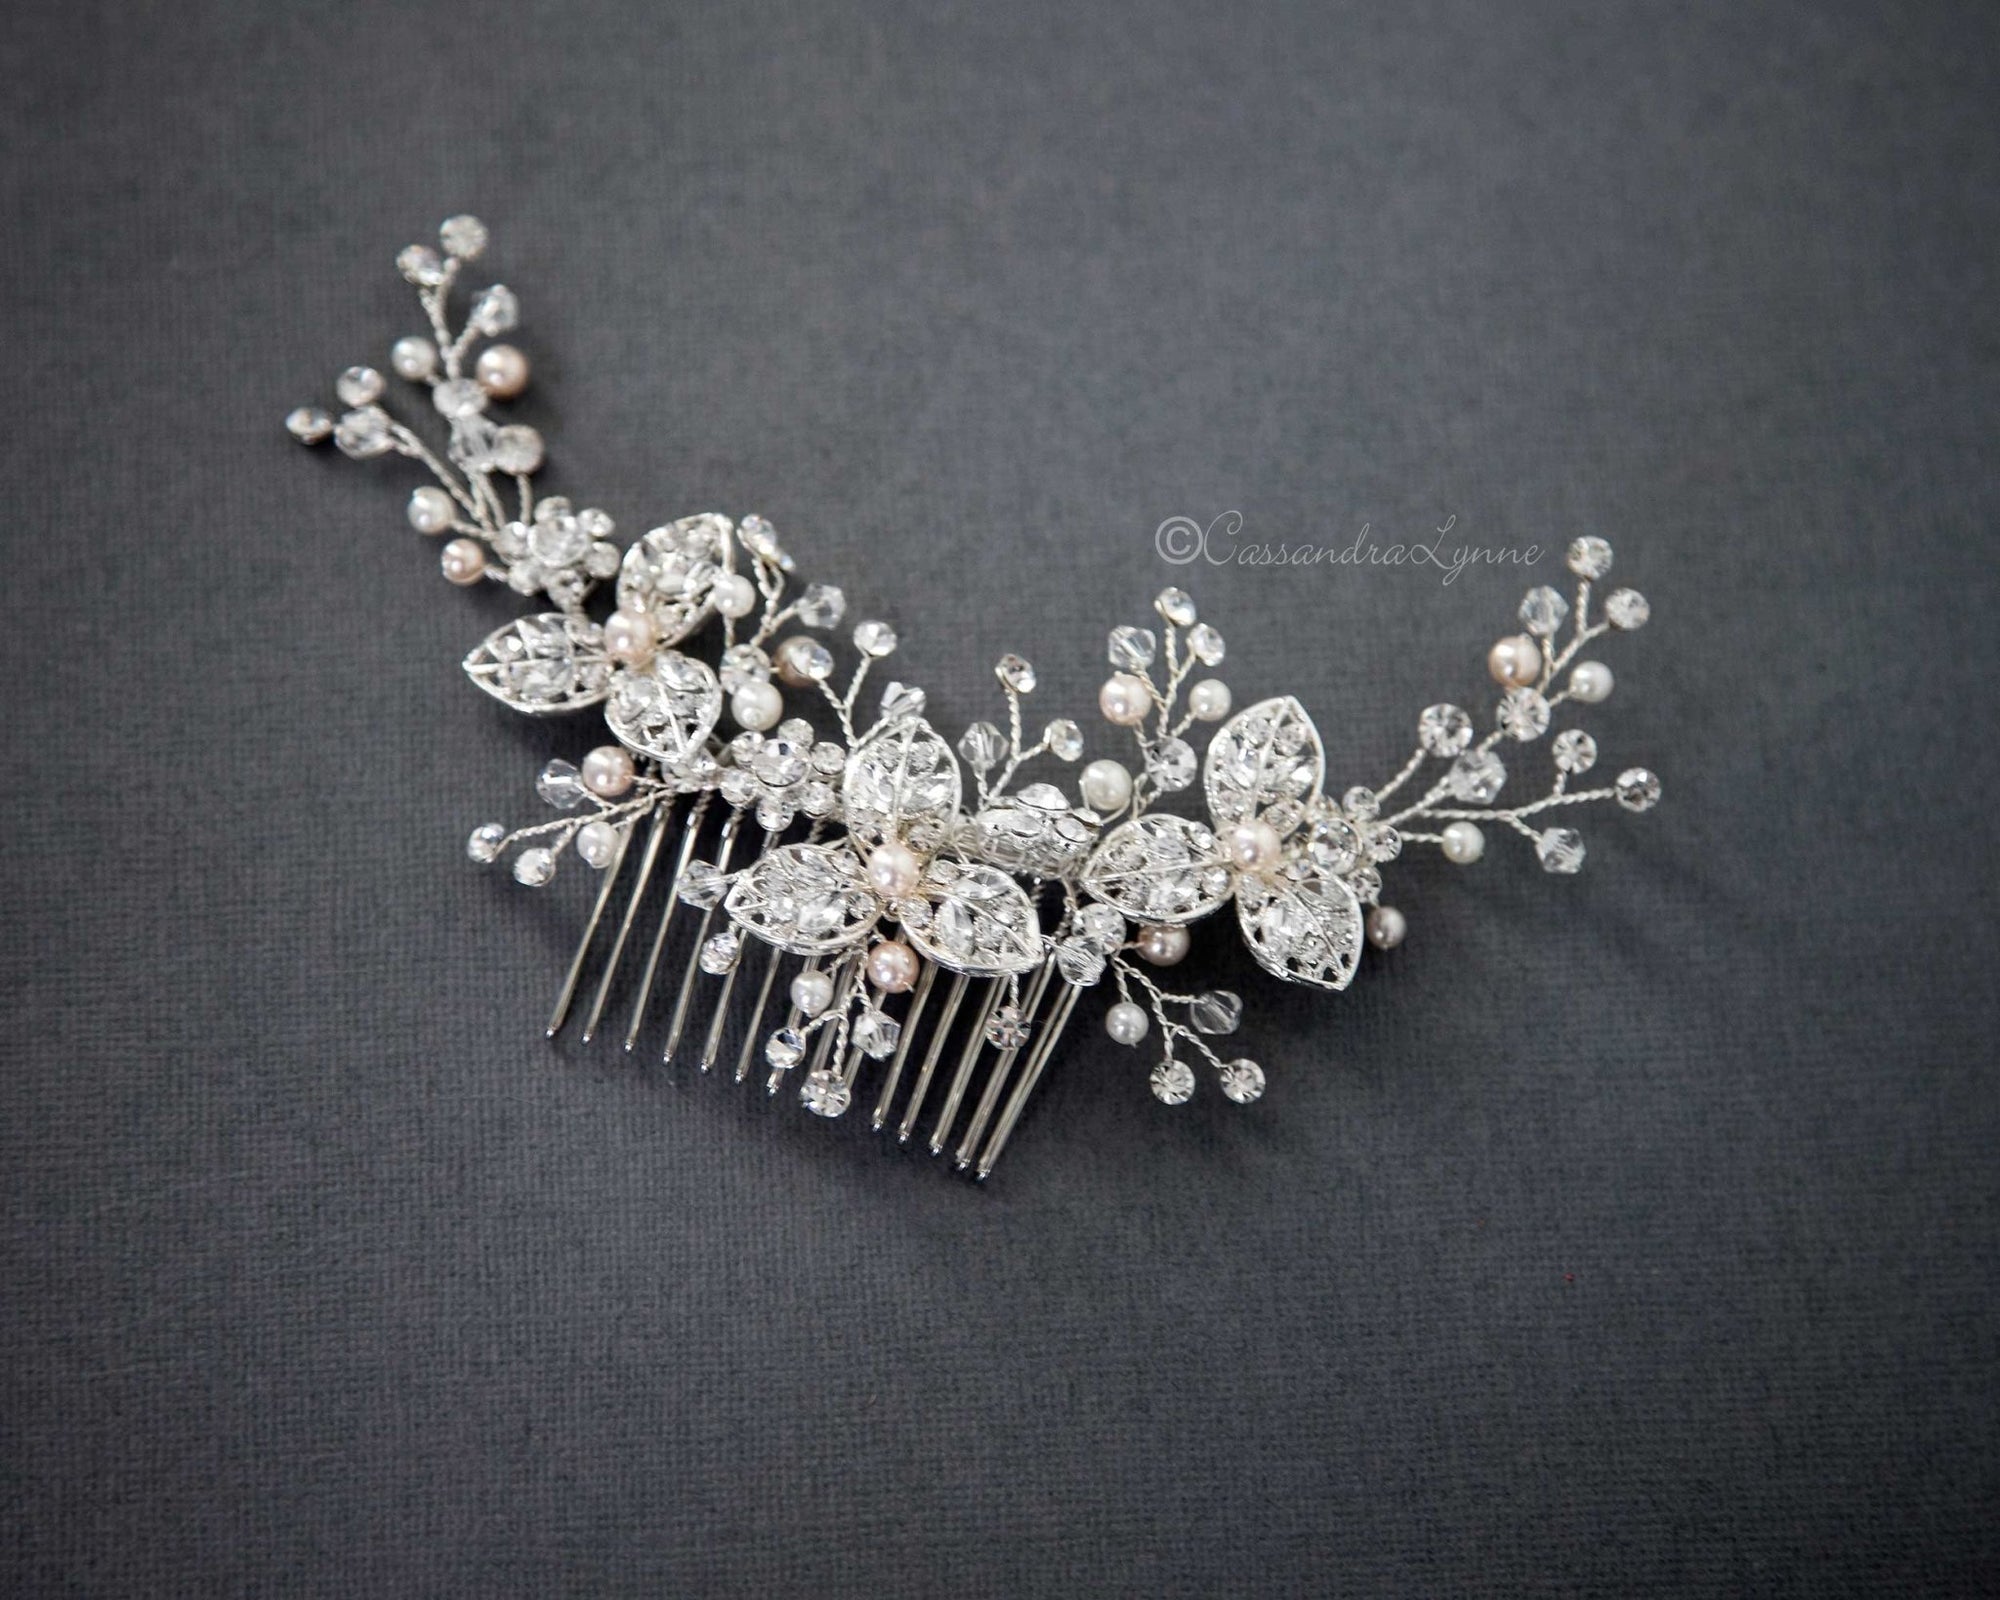 Filigree Flowers and Blush Pearls Hair Comb